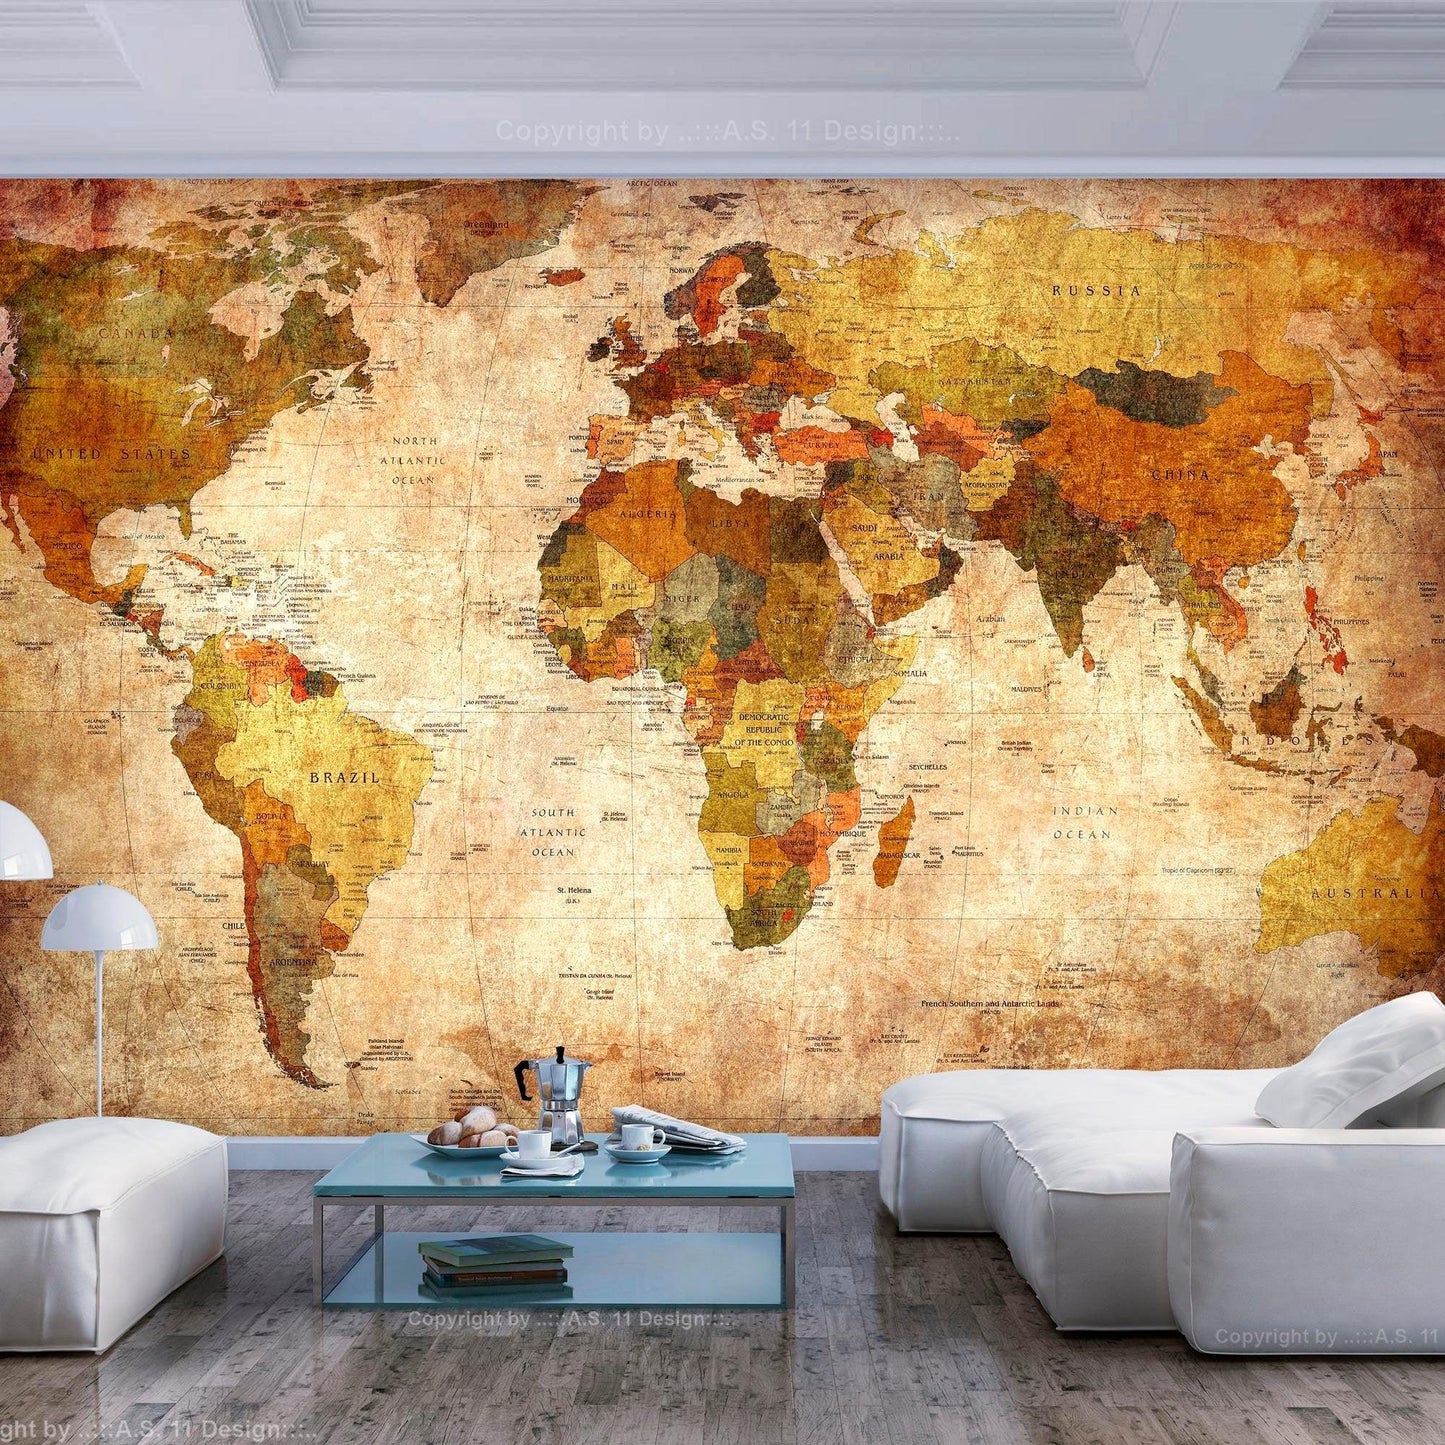 Peel and stick wall mural - Old World Map - www.trendingbestsellers.com